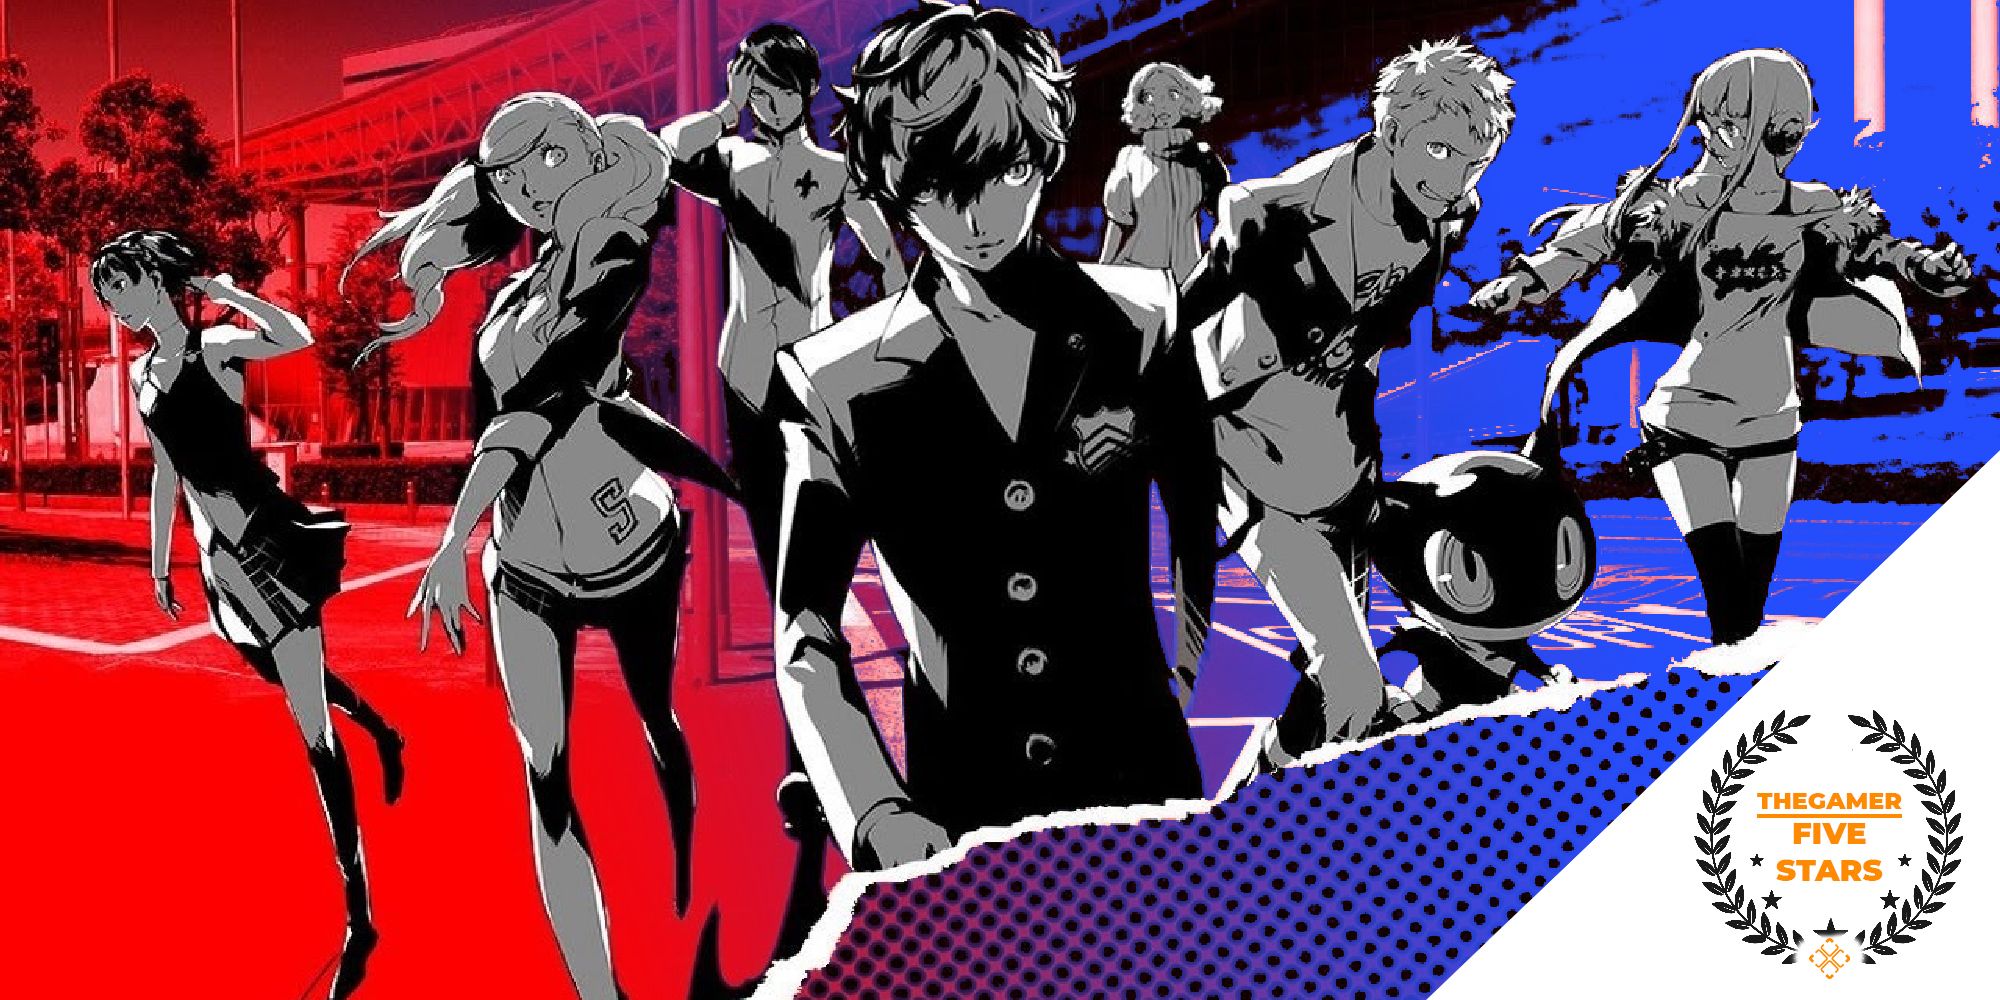 Buy Persona 5 Royal for SWITCH